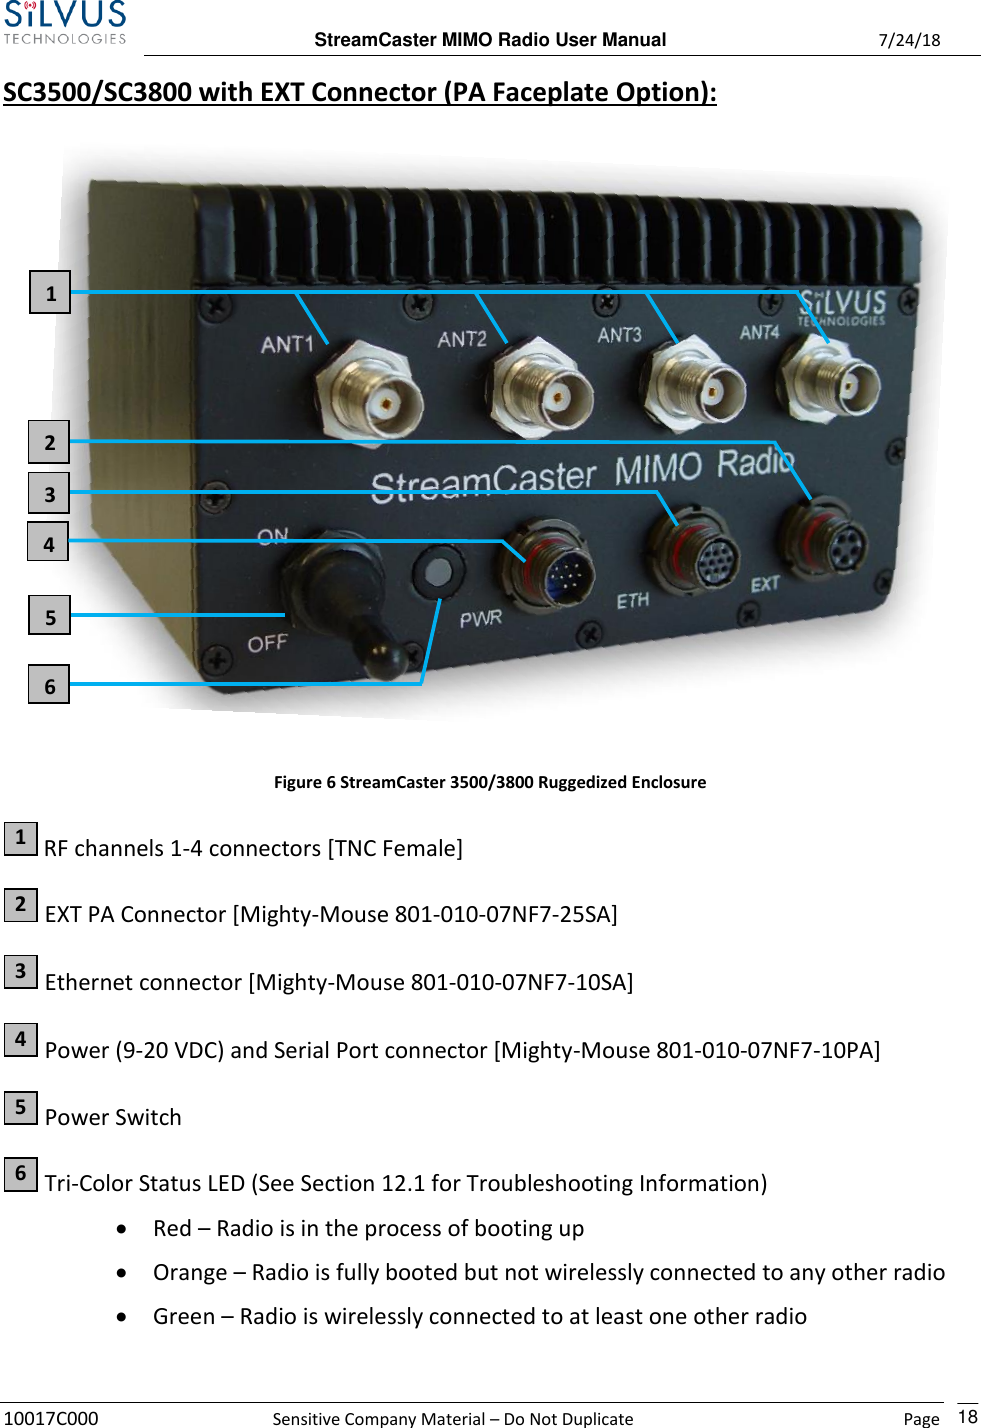  StreamCaster MIMO Radio User Manual  7/24/18 10017C000  Sensitive Company Material – Do Not Duplicate    Page    18 SC3500/SC3800 with EXT Connector (PA Faceplate Option):    Figure 6 StreamCaster 3500/3800 Ruggedized Enclosure  RF channels 1-4 connectors [TNC Female]  EXT PA Connector [Mighty-Mouse 801-010-07NF7-25SA]  Ethernet connector [Mighty-Mouse 801-010-07NF7-10SA]  Power (9-20 VDC) and Serial Port connector [Mighty-Mouse 801-010-07NF7-10PA]  Power Switch  Tri-Color Status LED (See Section 12.1 for Troubleshooting Information) • Red – Radio is in the process of booting up • Orange – Radio is fully booted but not wirelessly connected to any other radio • Green – Radio is wirelessly connected to at least one other radio 1 2 3 4 5 6 2 3 4 1 6 5 